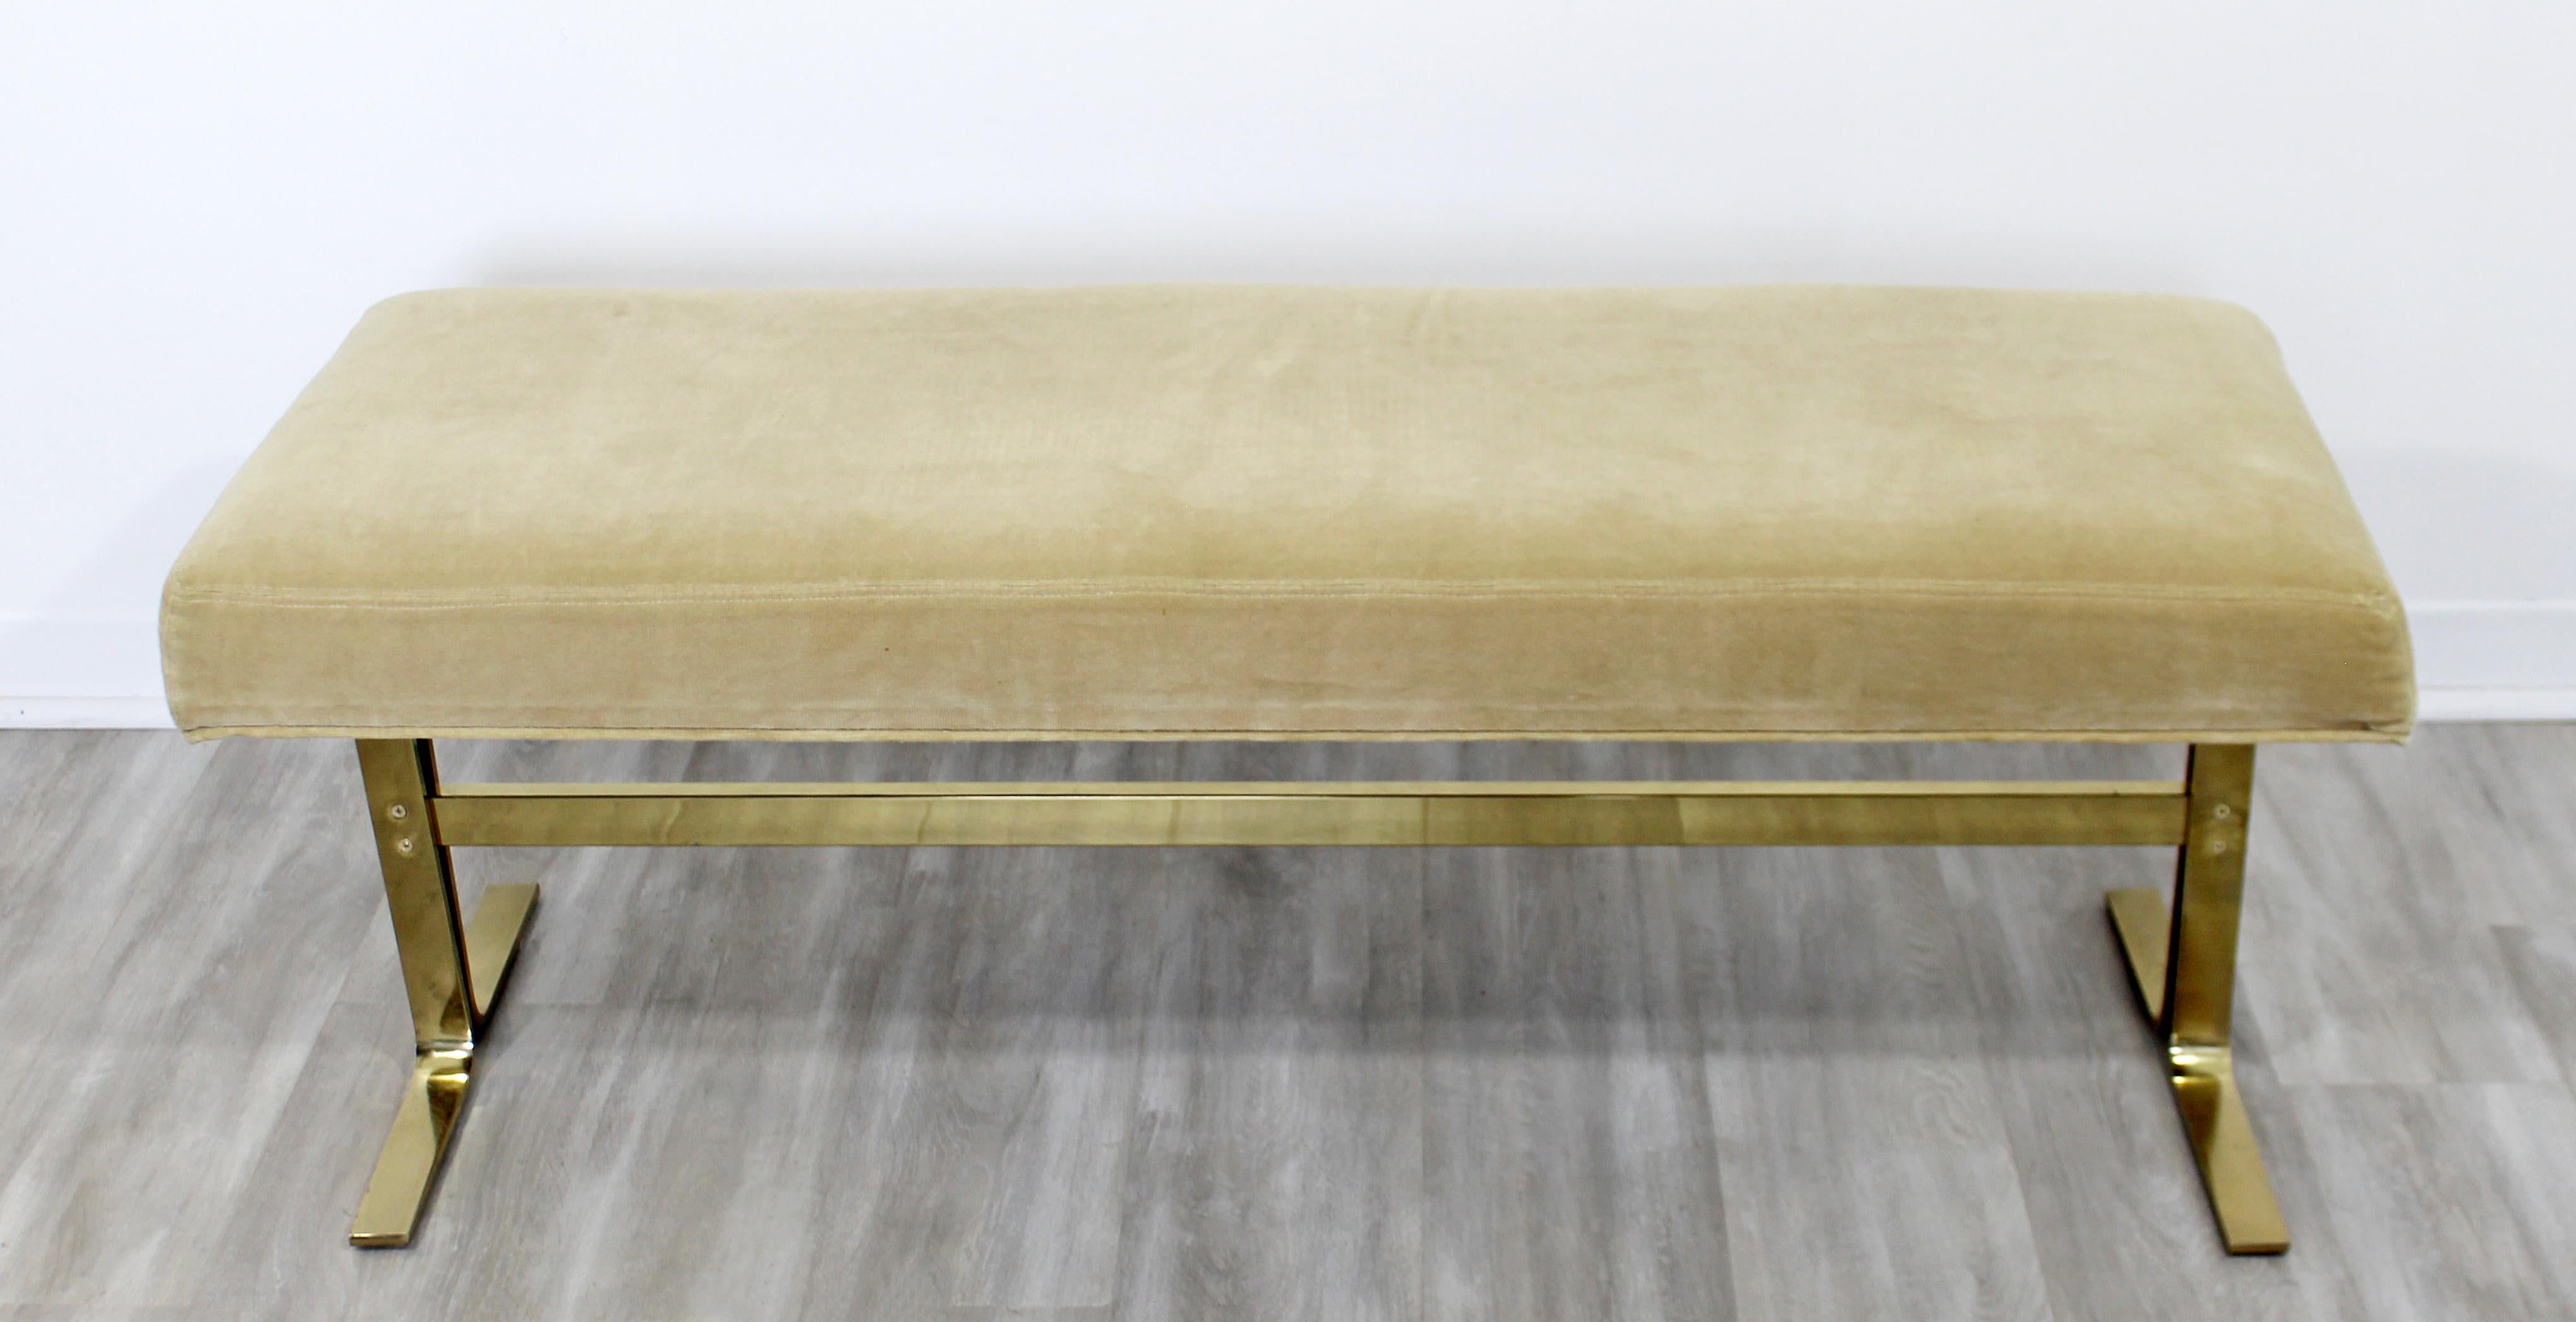 For your consideration is a brilliant, brass bench seat, for The Design Institute of America, circa 1970s. In excellent vintage condition. The dimensions are 49.5